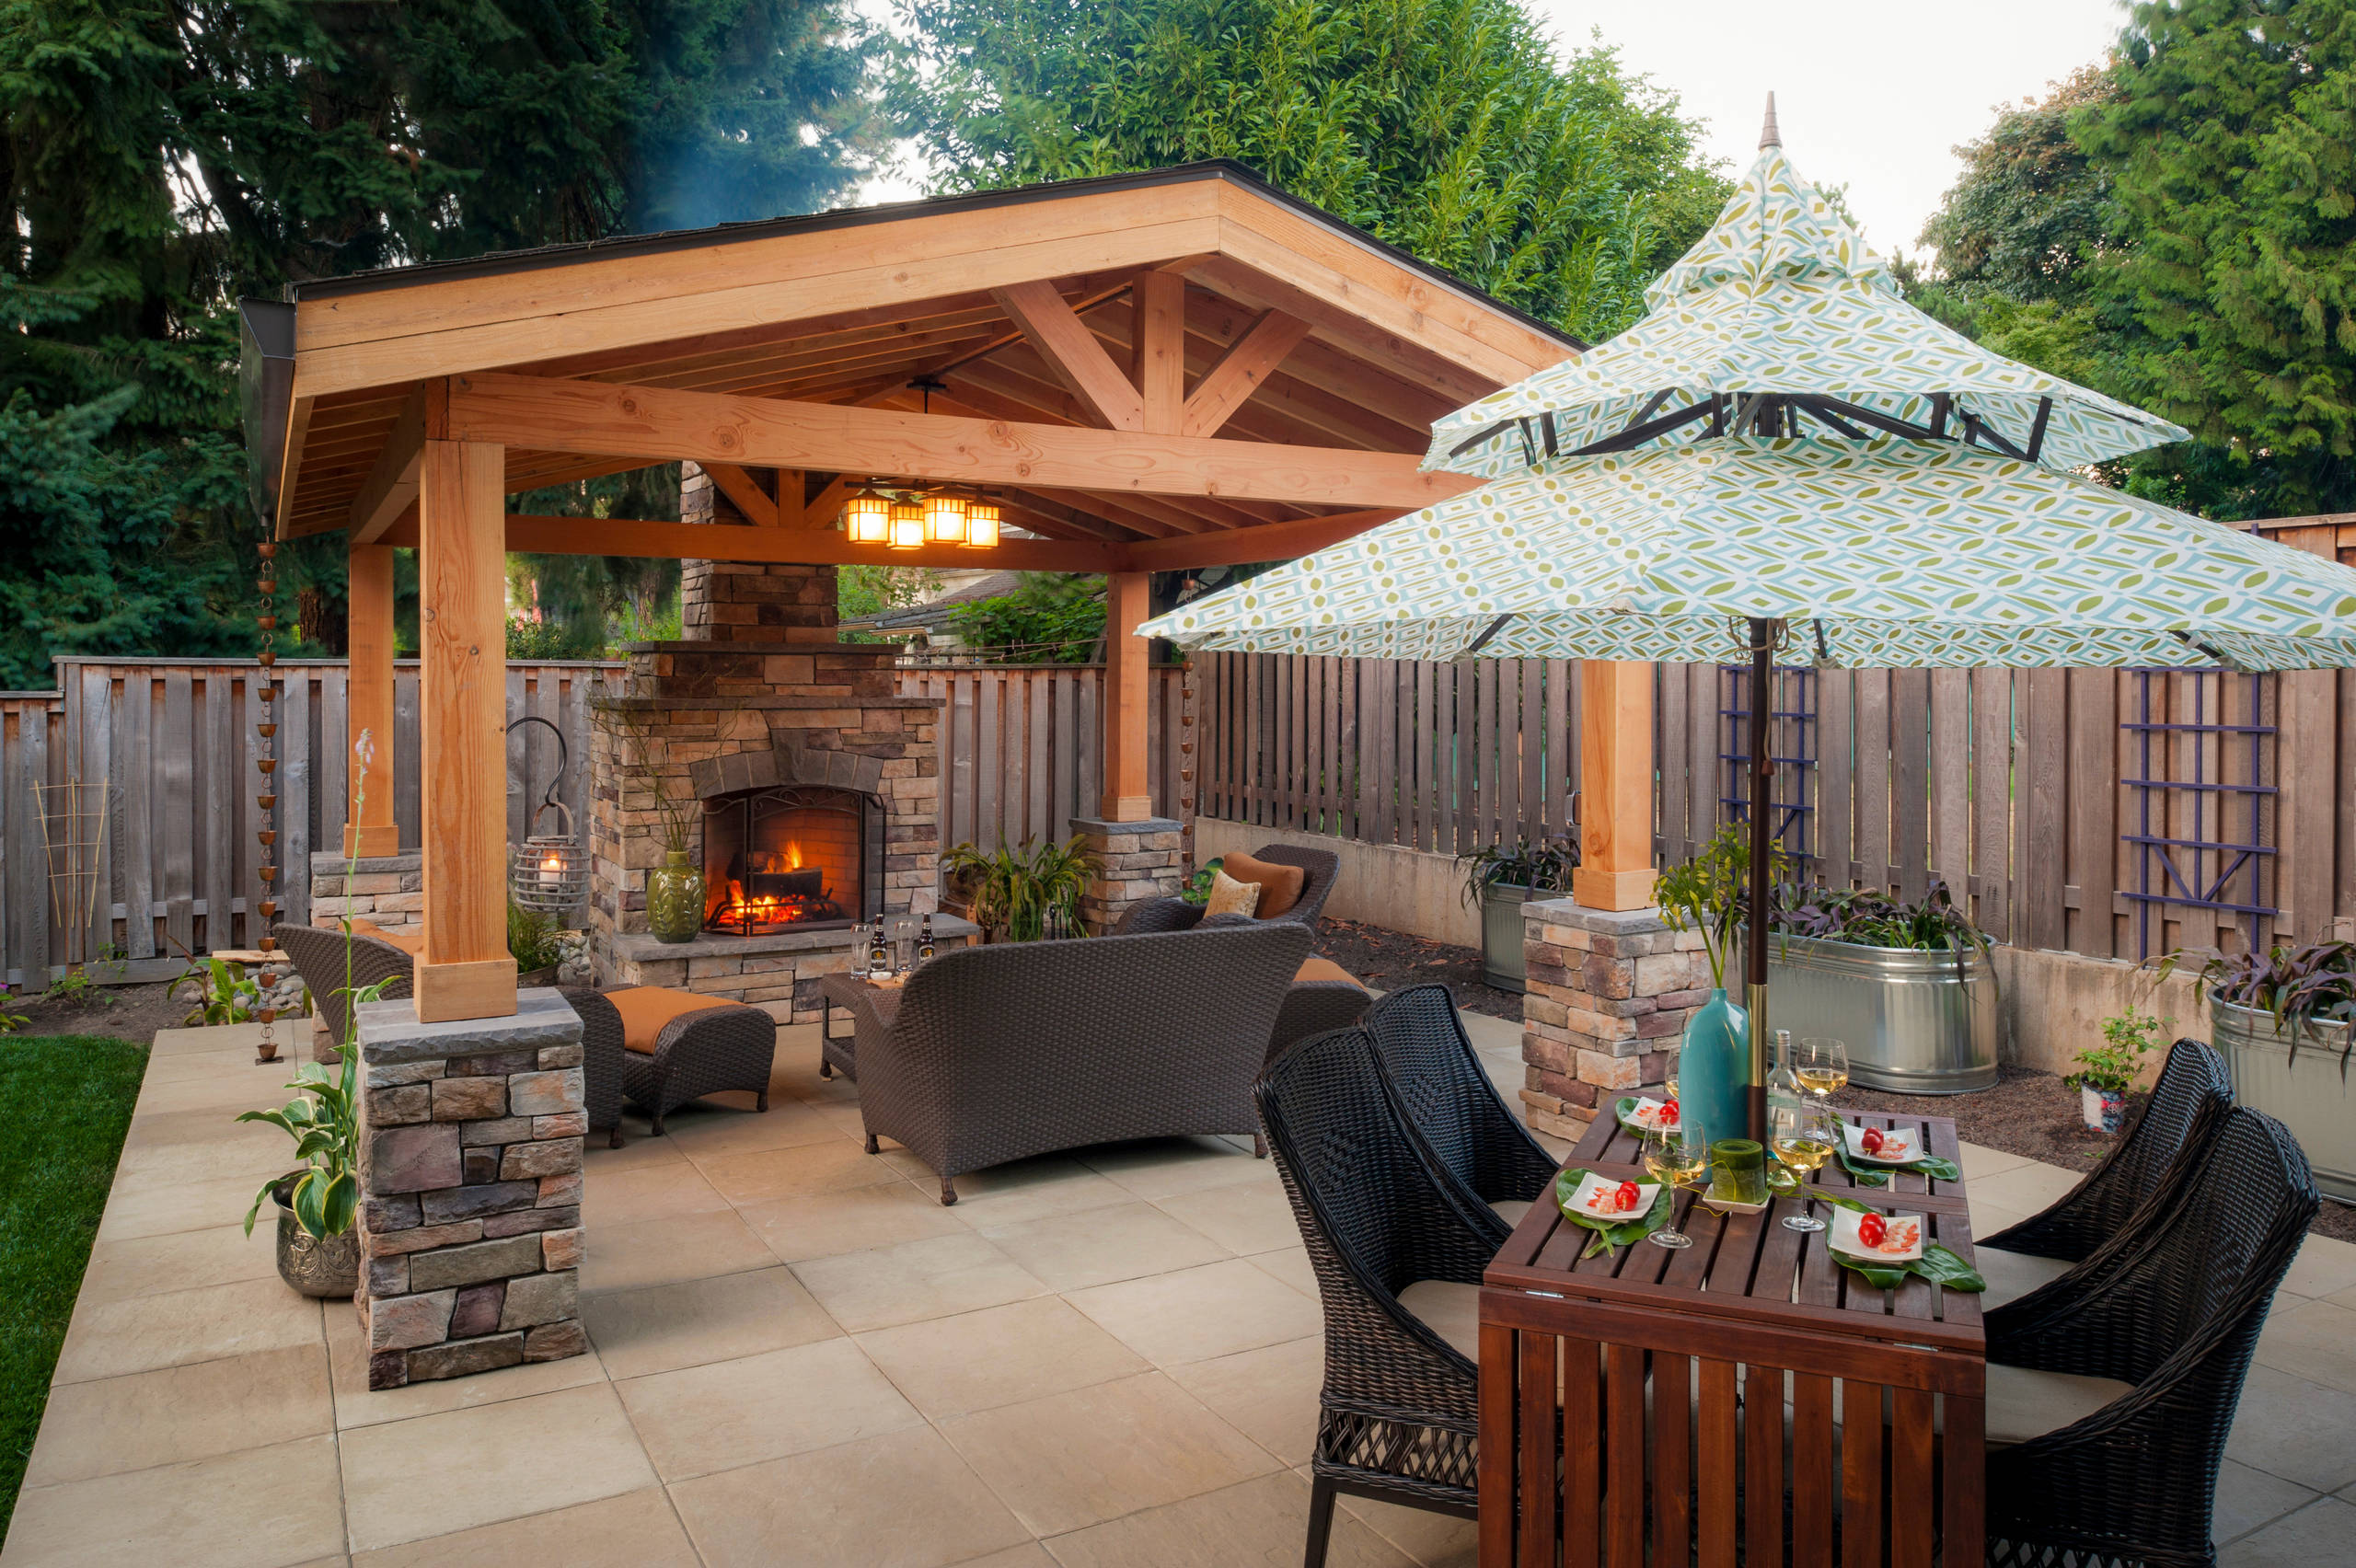 Patio With A Fire Pit And Gazebo, Can You Have A Fire Pit Inside Gazebo